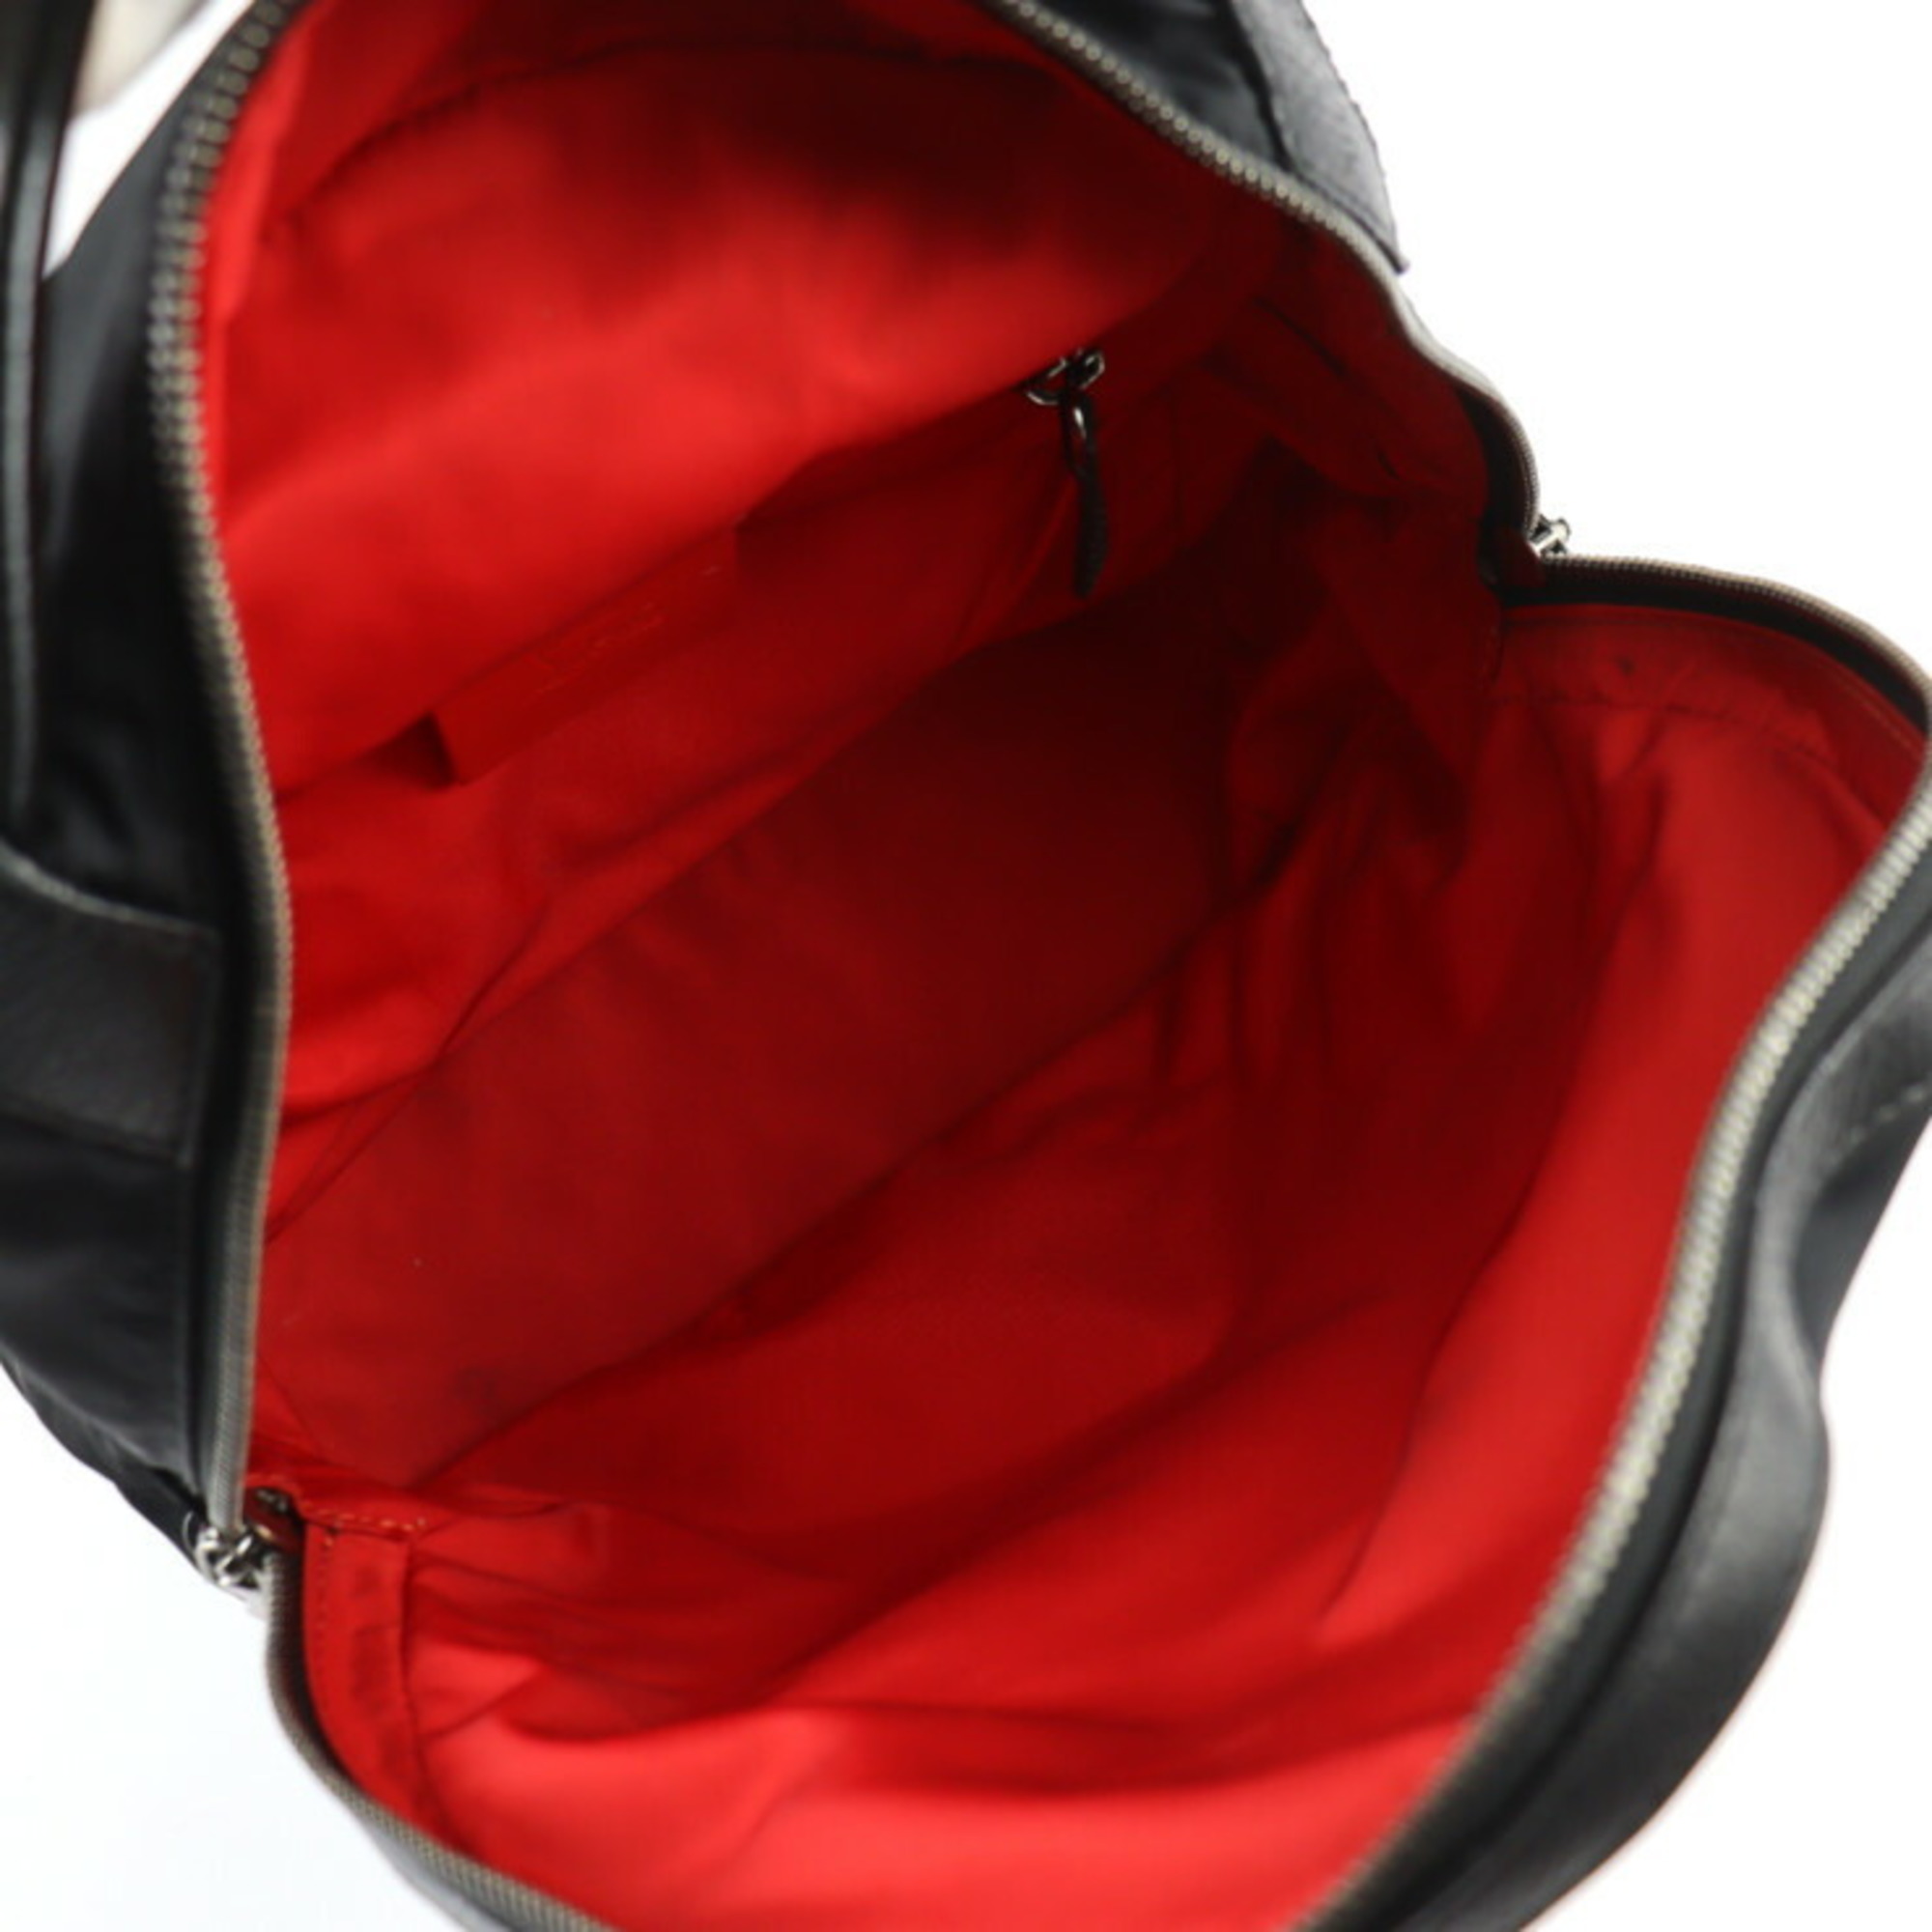 Christian Louboutin Buckle Small Backpack/Daypack Nylon Leather Black Red Backpack Studs